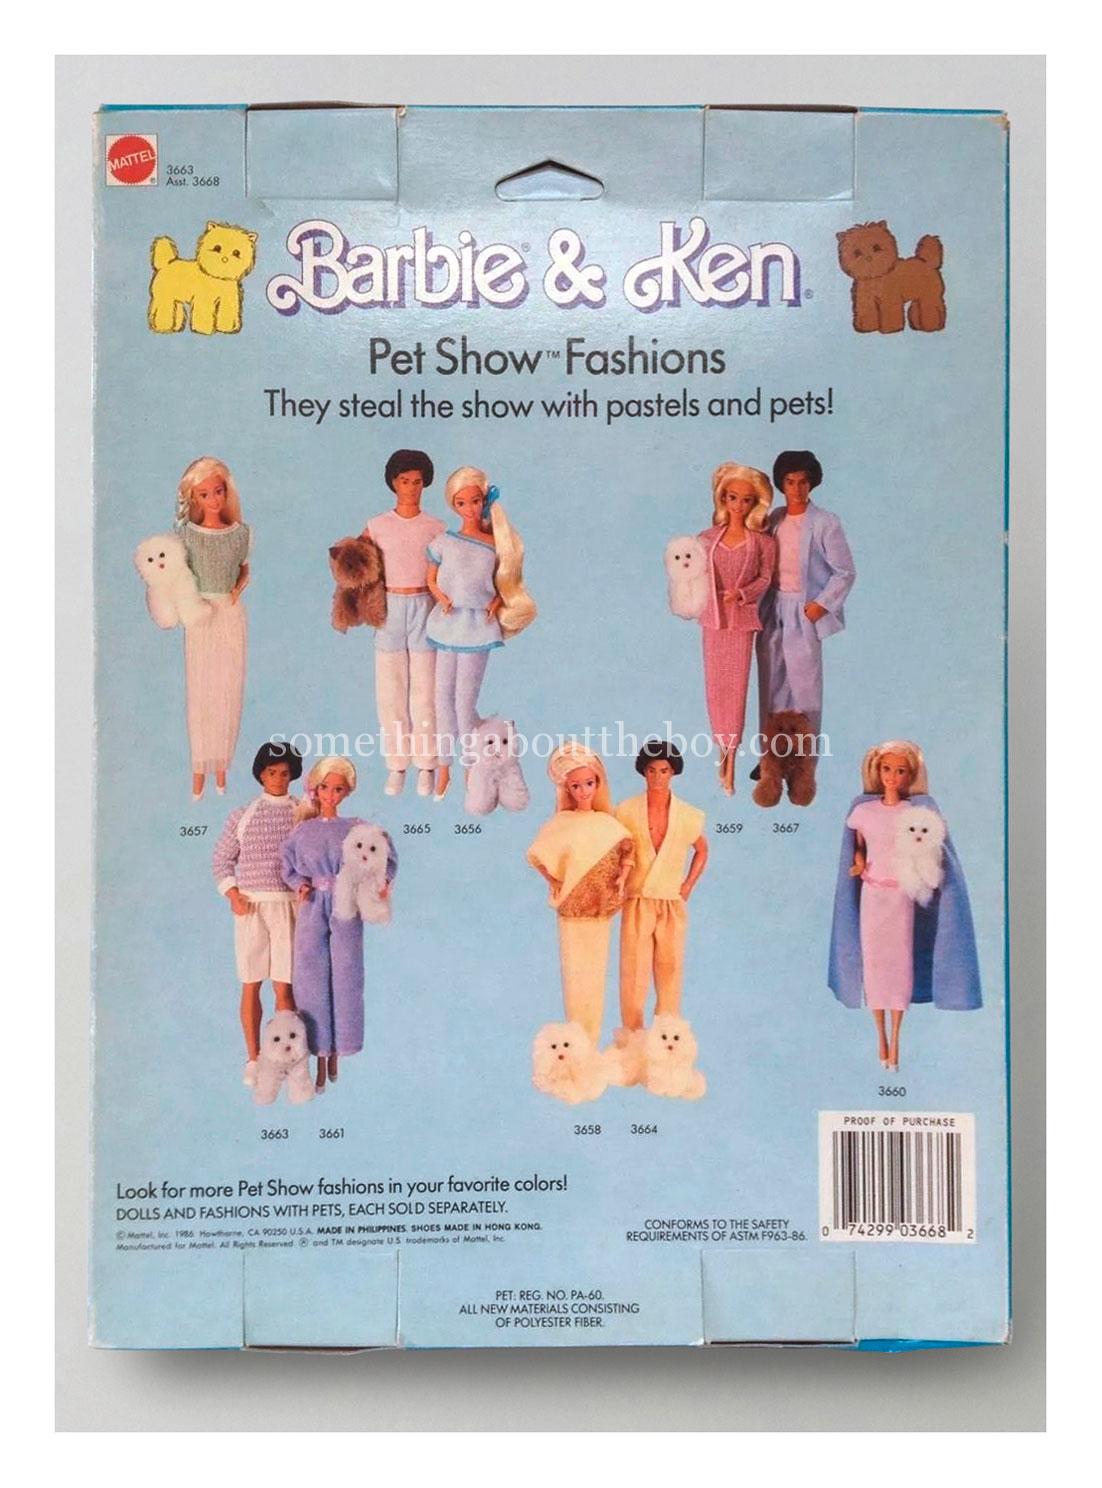 1987 Pet Show Fashions reverse of packaging